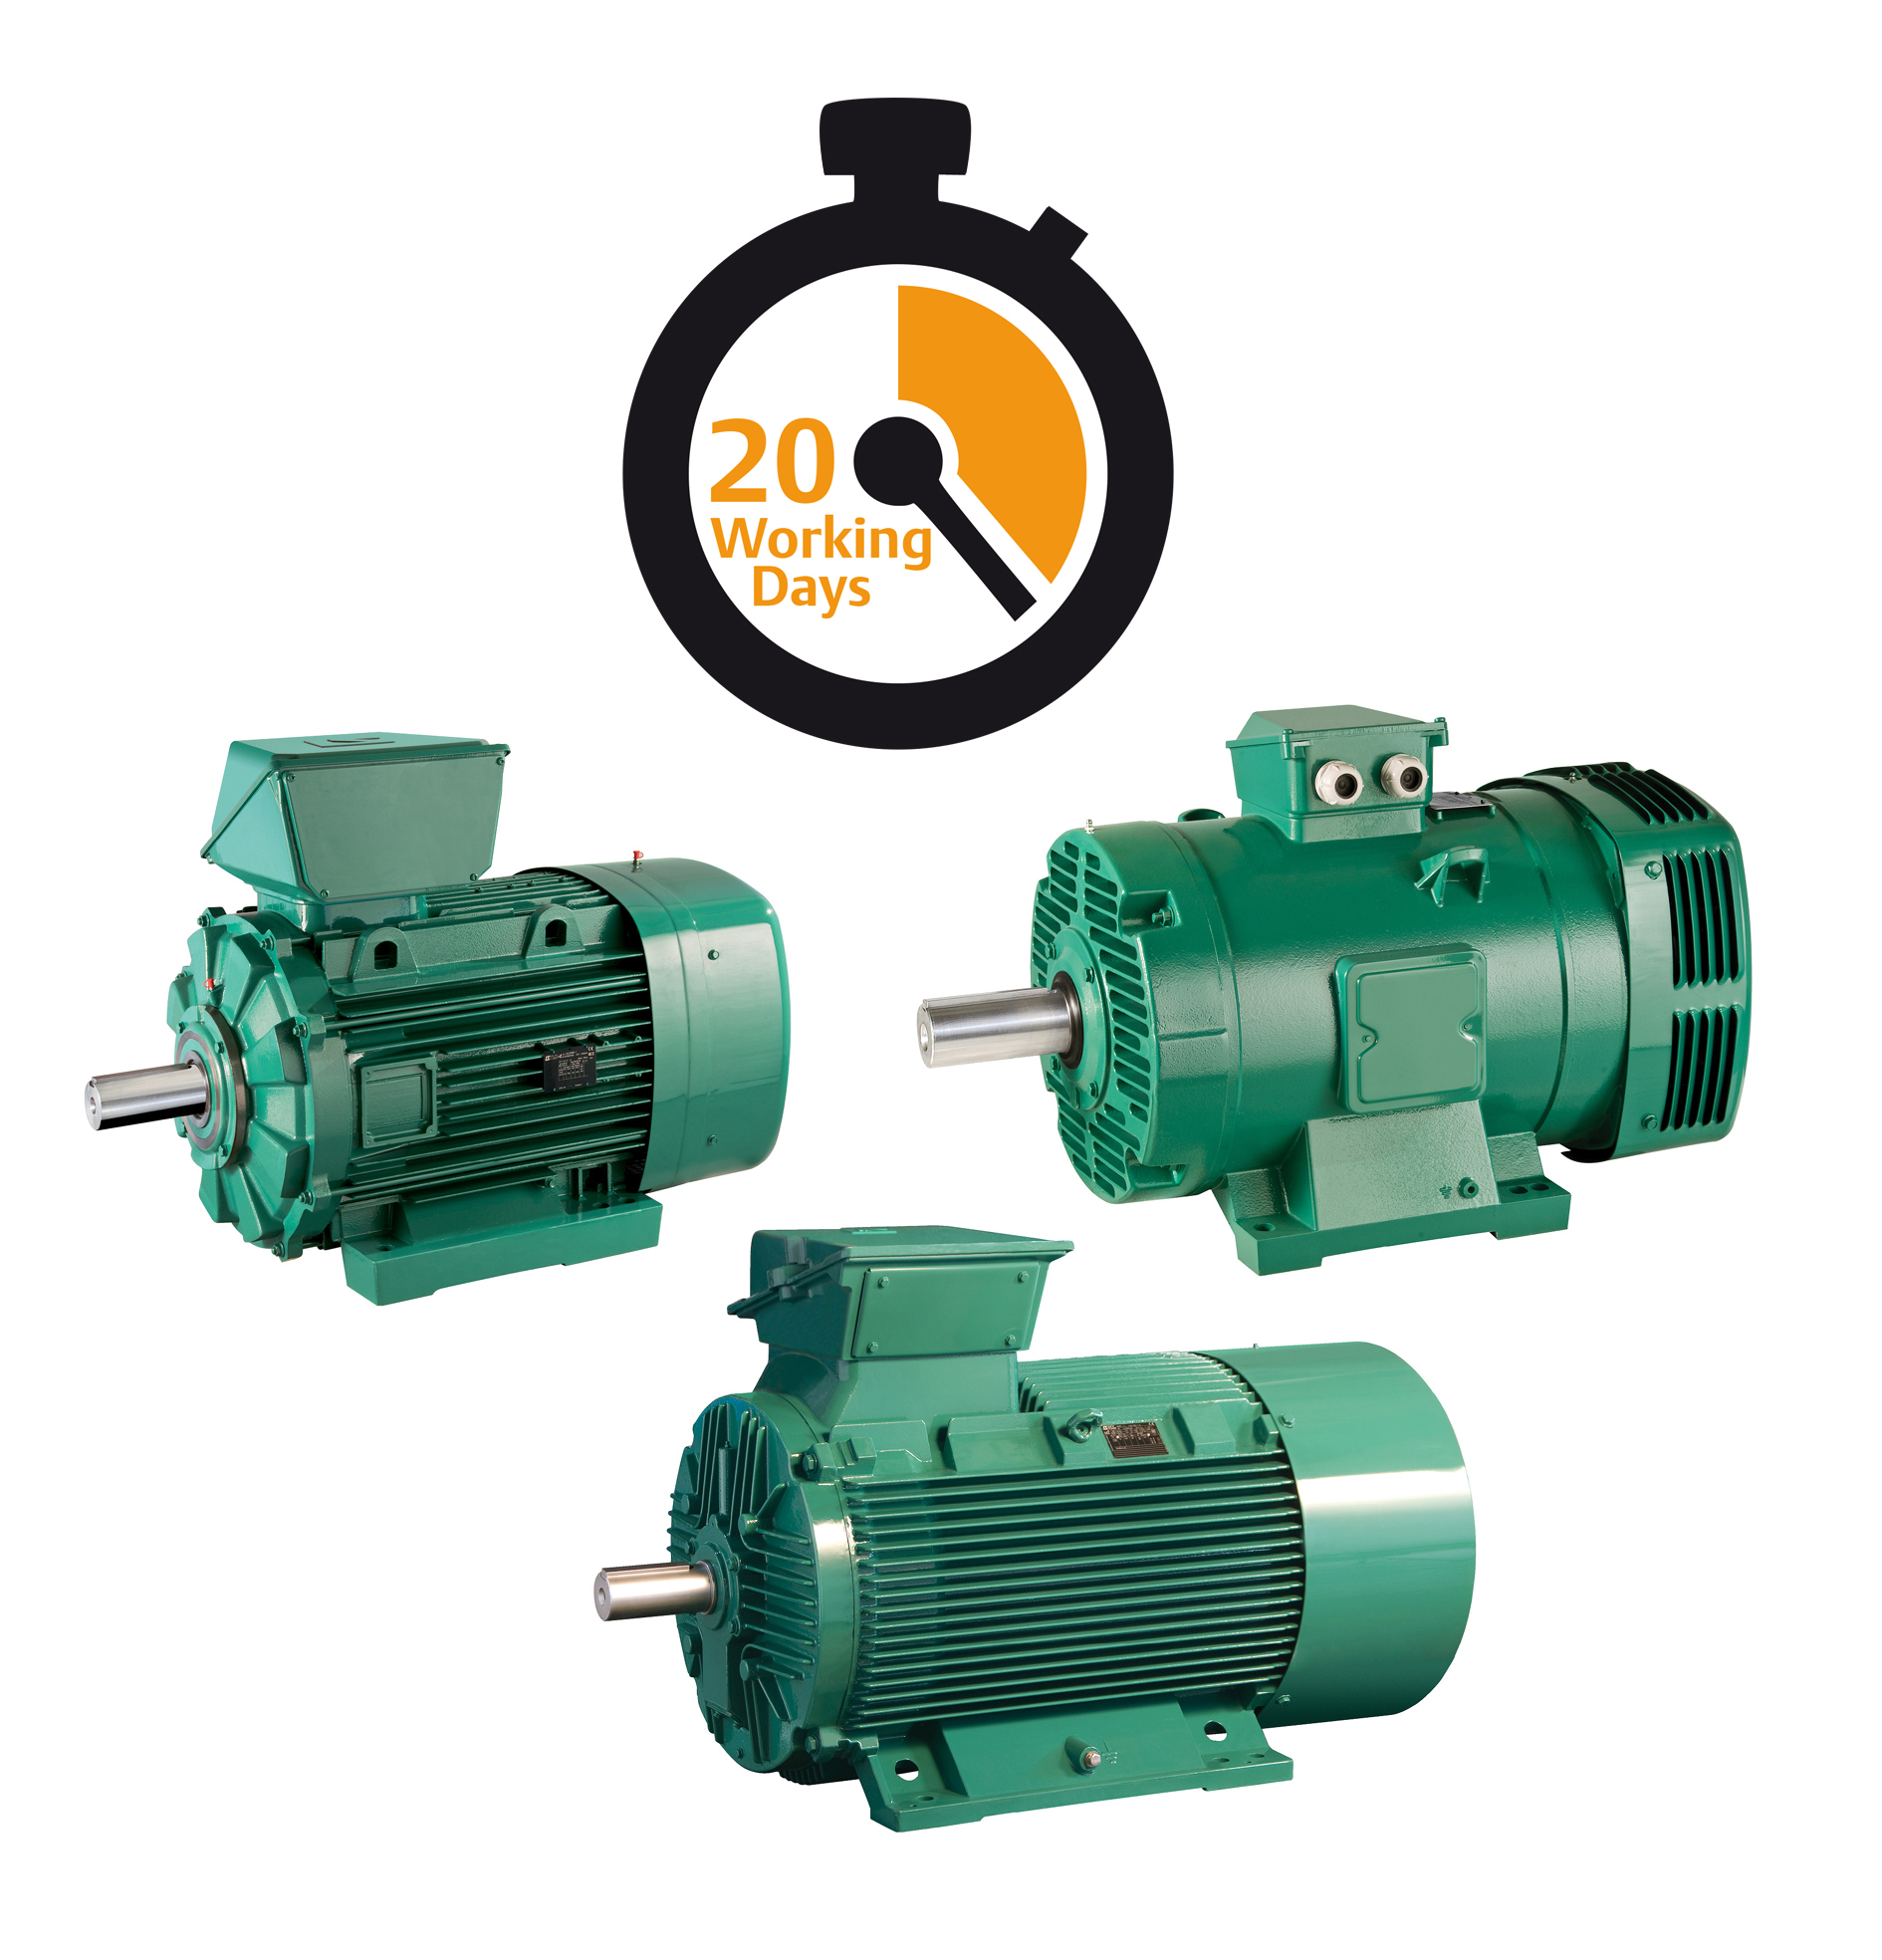 Motors for 20 working days availability